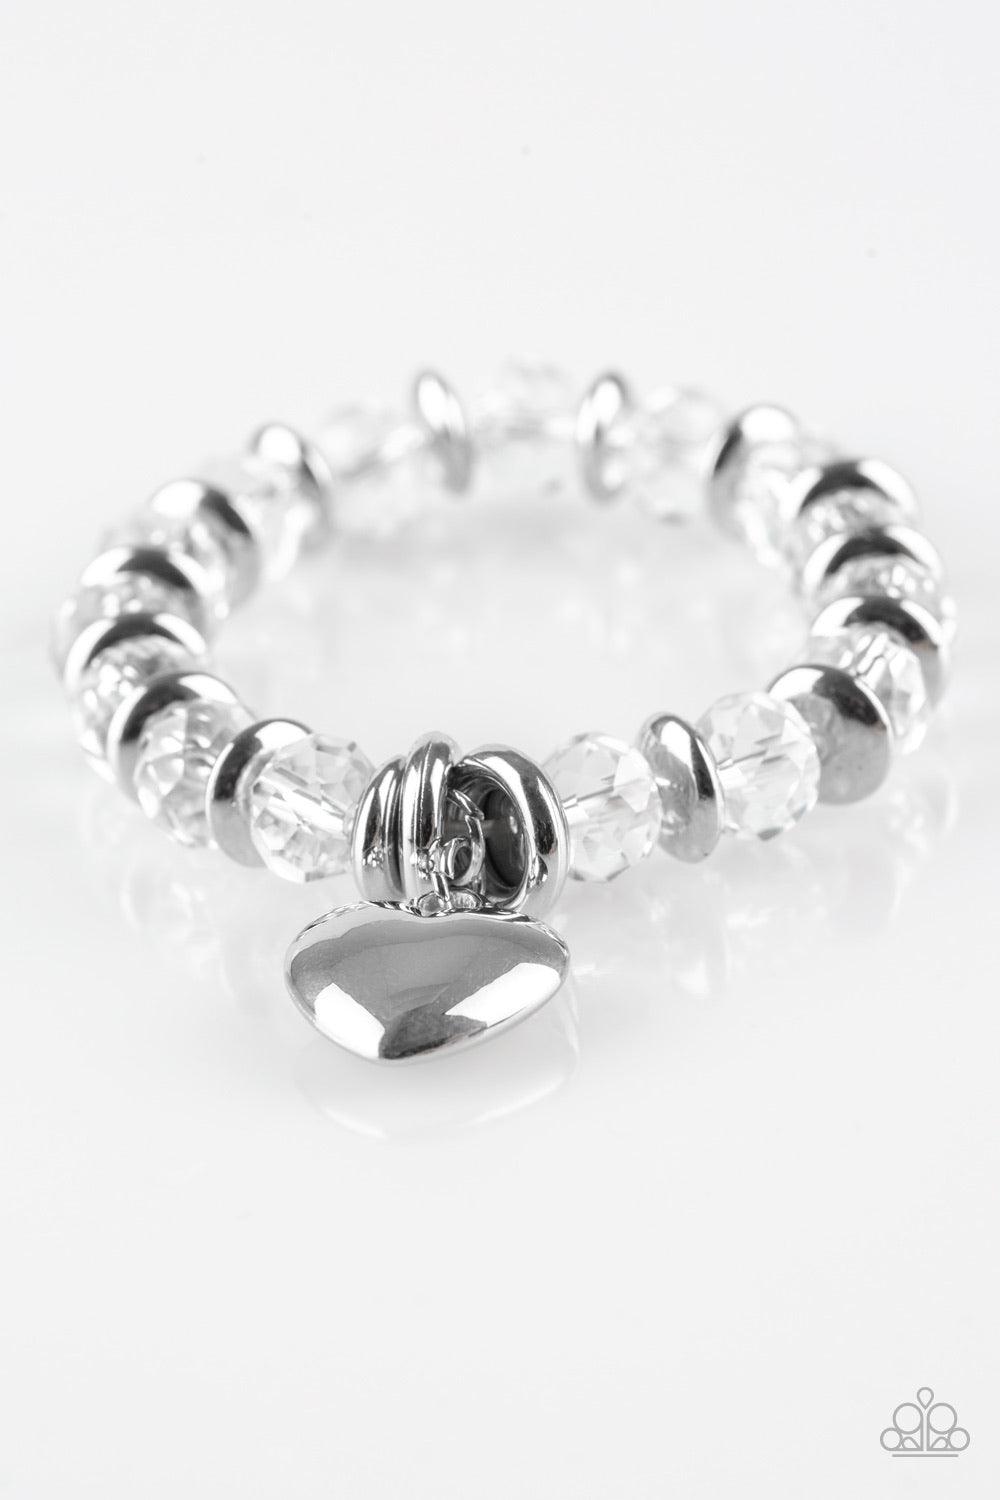 Paparazzi Accessories Need I Say AMOUR? - White Sparkling crystal-like beads and shimmery silver accents are threaded along a stretchy band. An oversized silver heart charm swings from the wrist for a whimsical finish. Sold as one individual bracelet. Jew